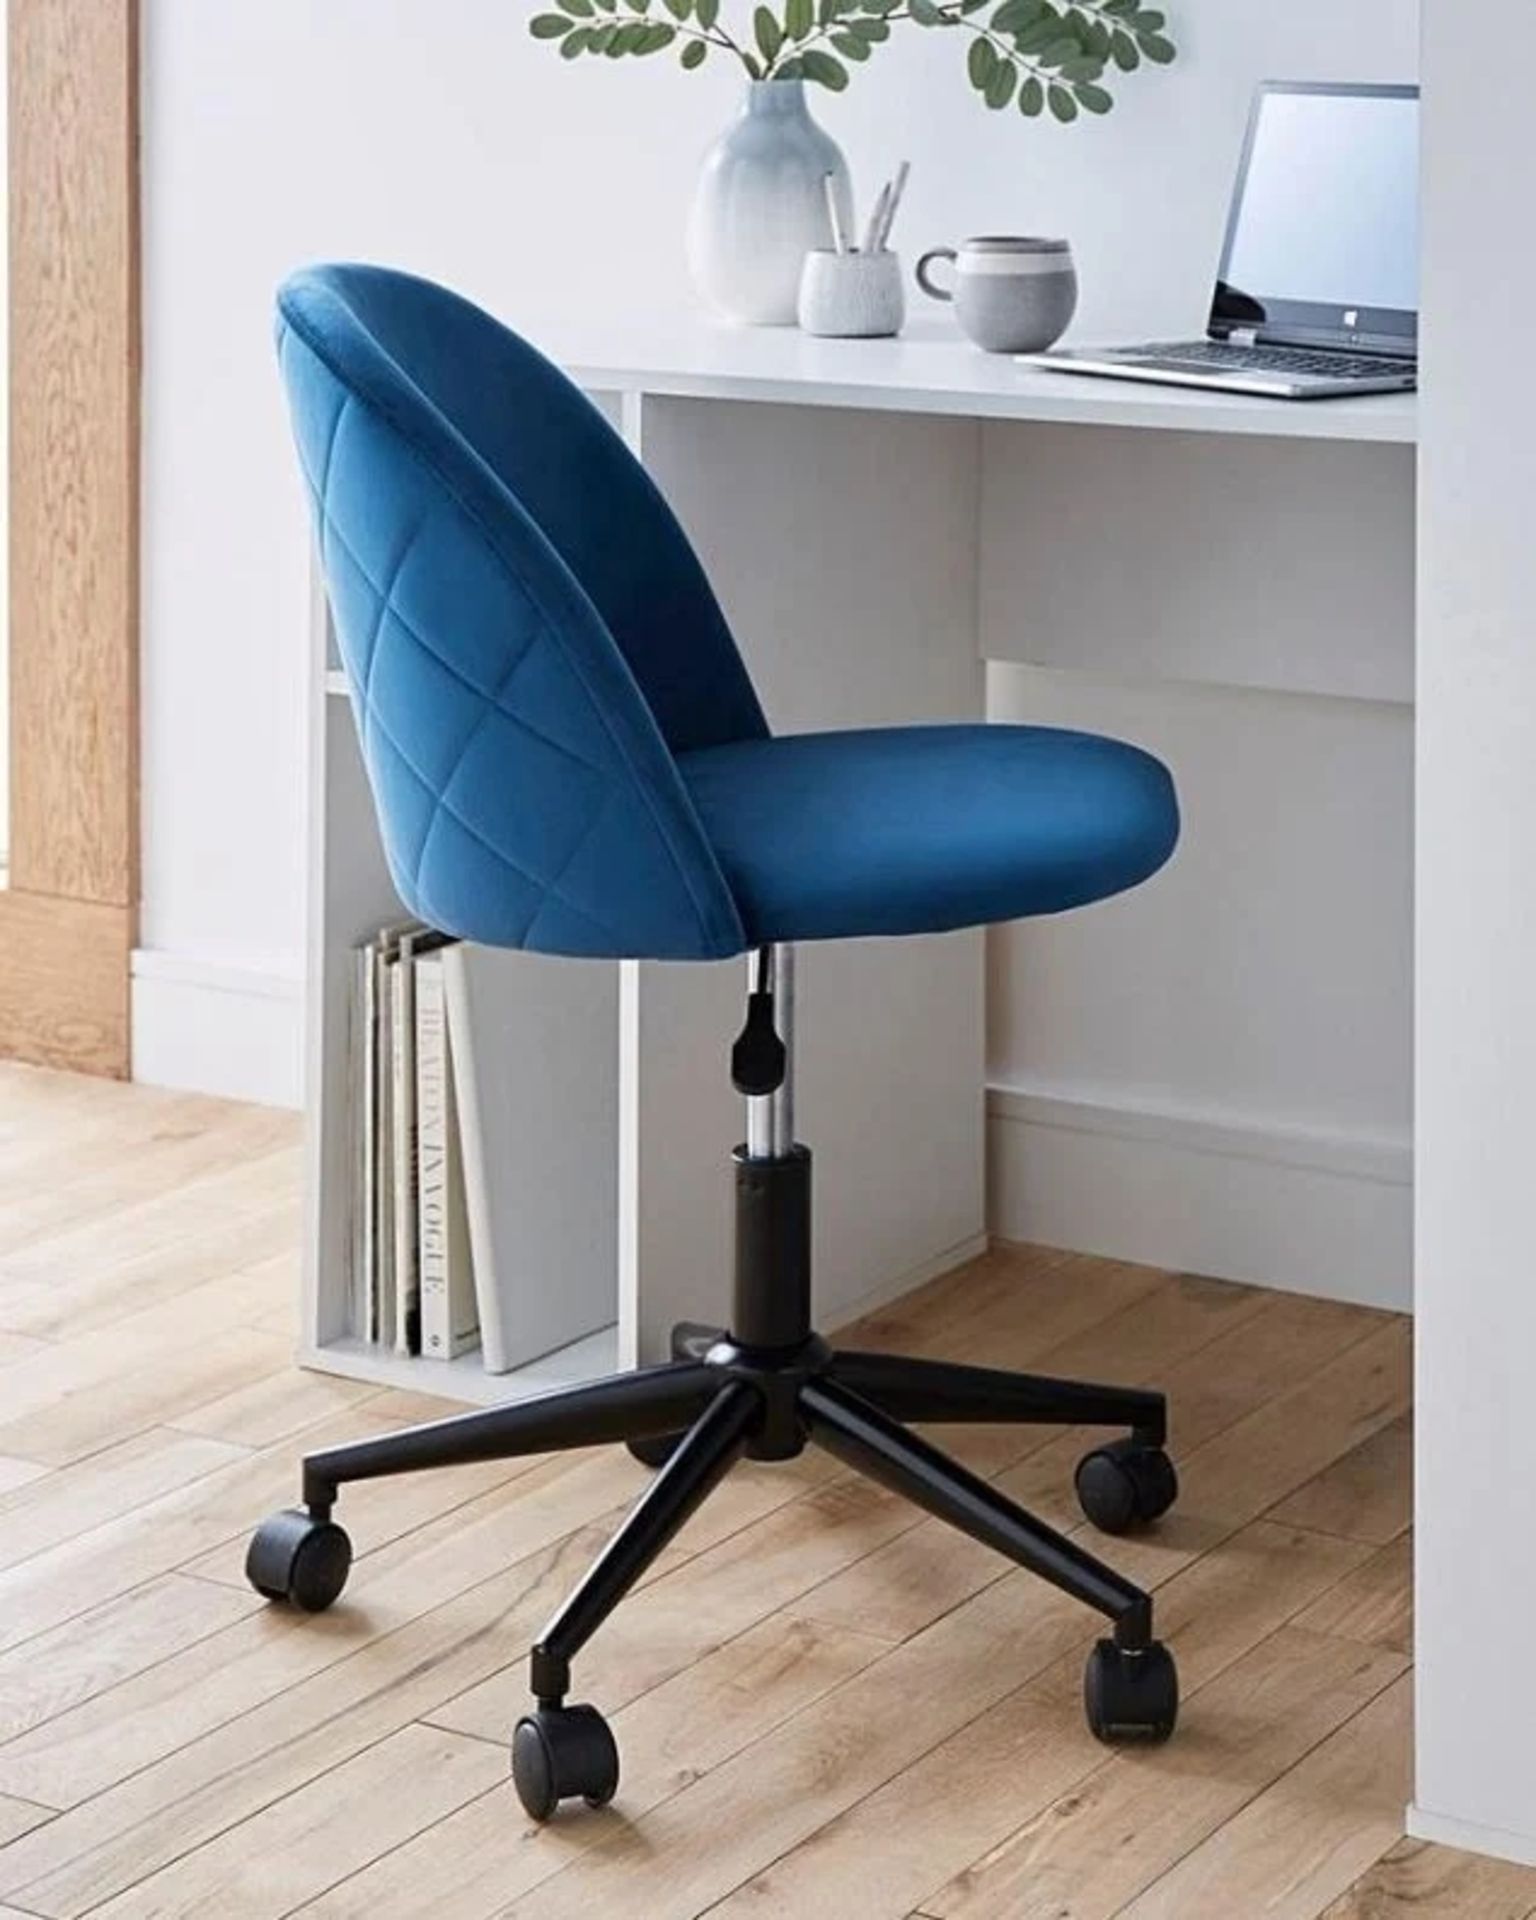 Brand New & Boxed Klara Office Chair - Navy. RRP £199 each. The Klara Office Chair is a luxurious - Image 2 of 5